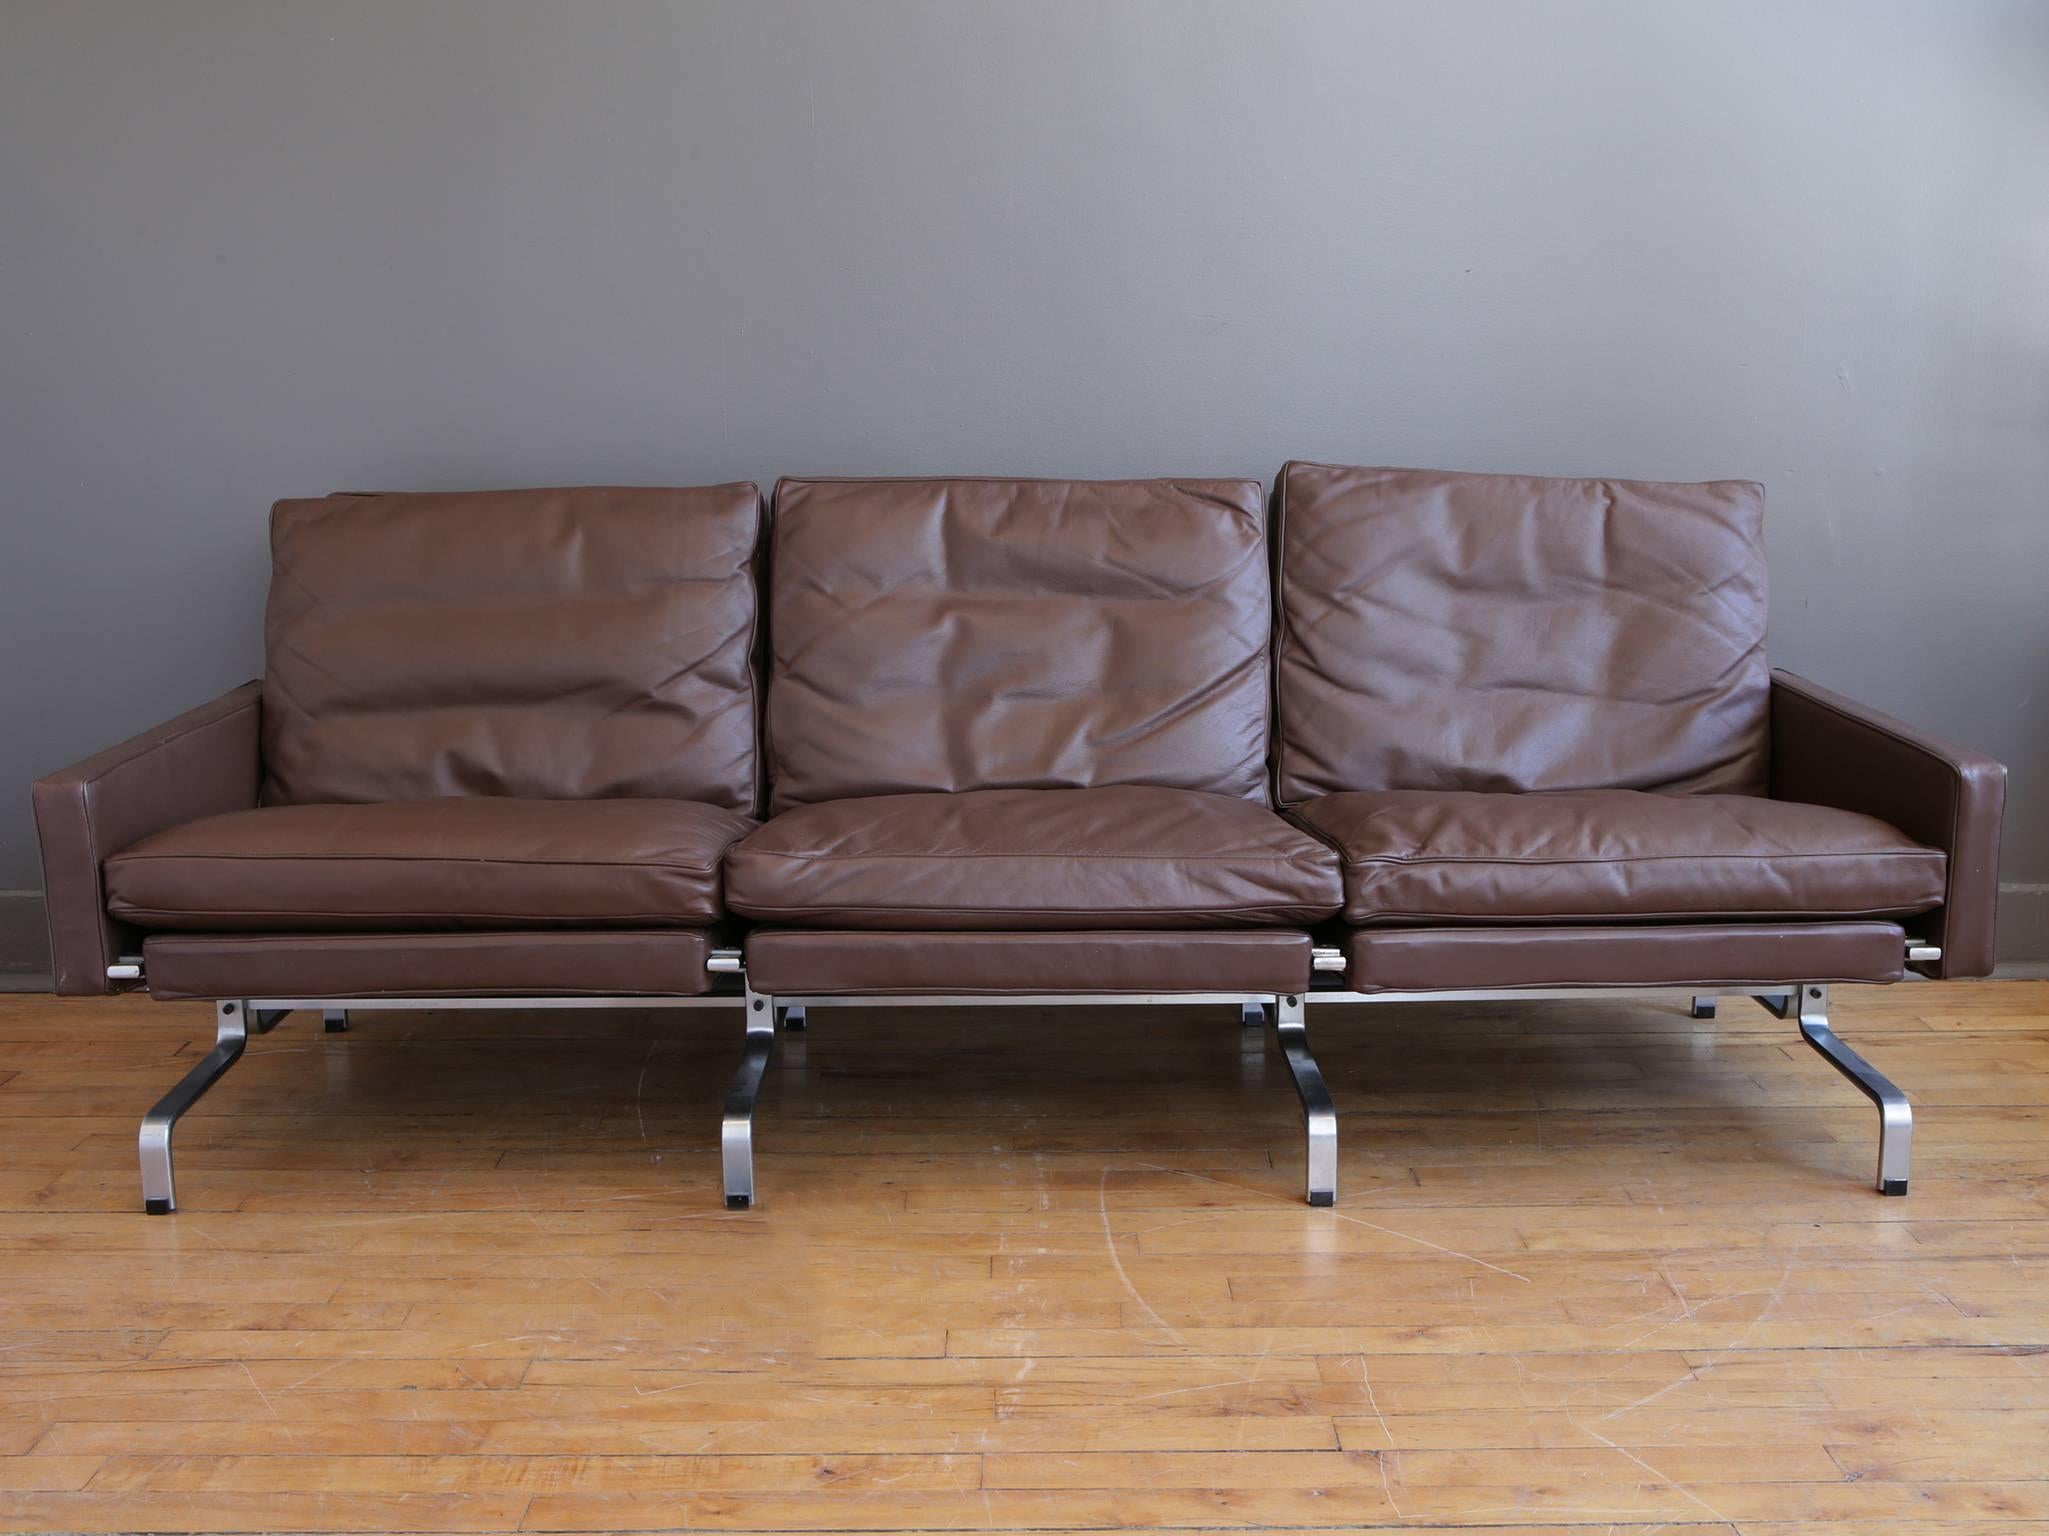 A three-seater sofa designed by Poul Kjaerholm for E. Kold Christensen, circa 1960. Upholstered in chocolate brown Spinneybeck leather. EKC stamped mark to underside of matte chrome-plated steel frame. 